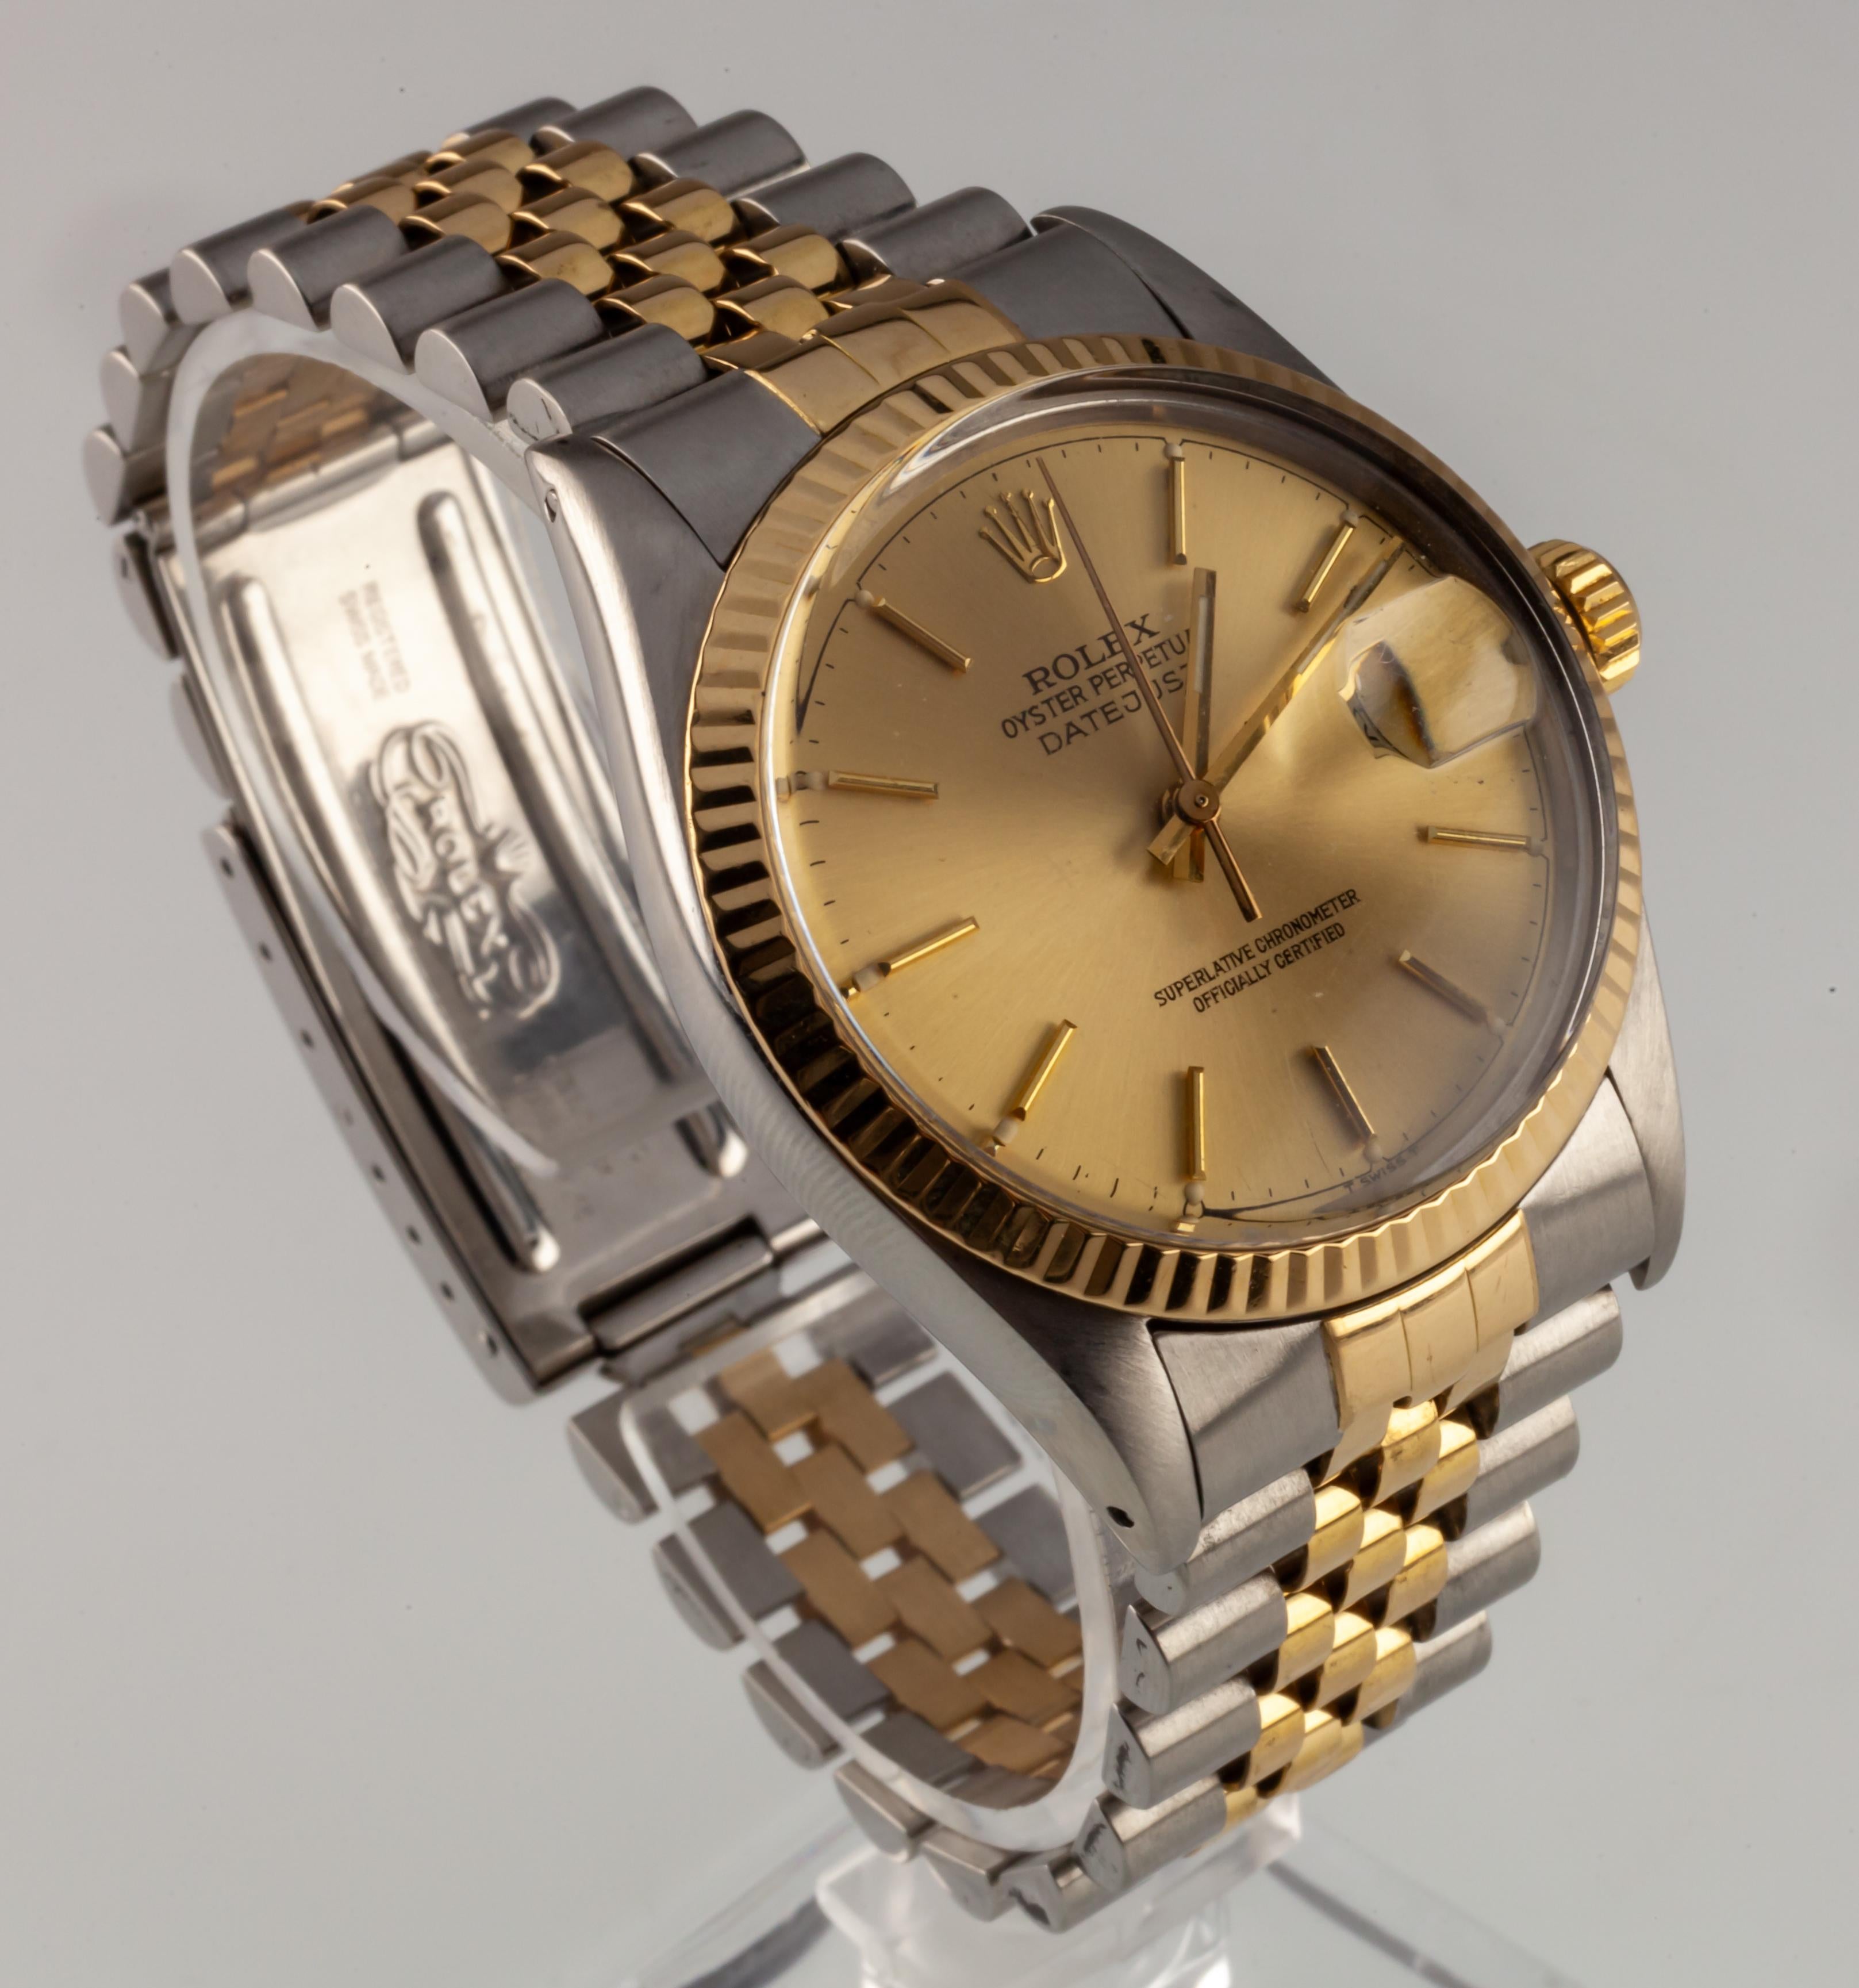 Rolex Men's Two-Tone Jubilee Oyster Perpetual Datejust Watch 16013 1986

Model #16013
Serial #93903XX
Movement #3035
Movement Serial #16717XX
Year: 1986

Stainless Steel Case w/ Fluted 18k Yellow Gold Bezel
Diameter = 36 mm (37 mm w/